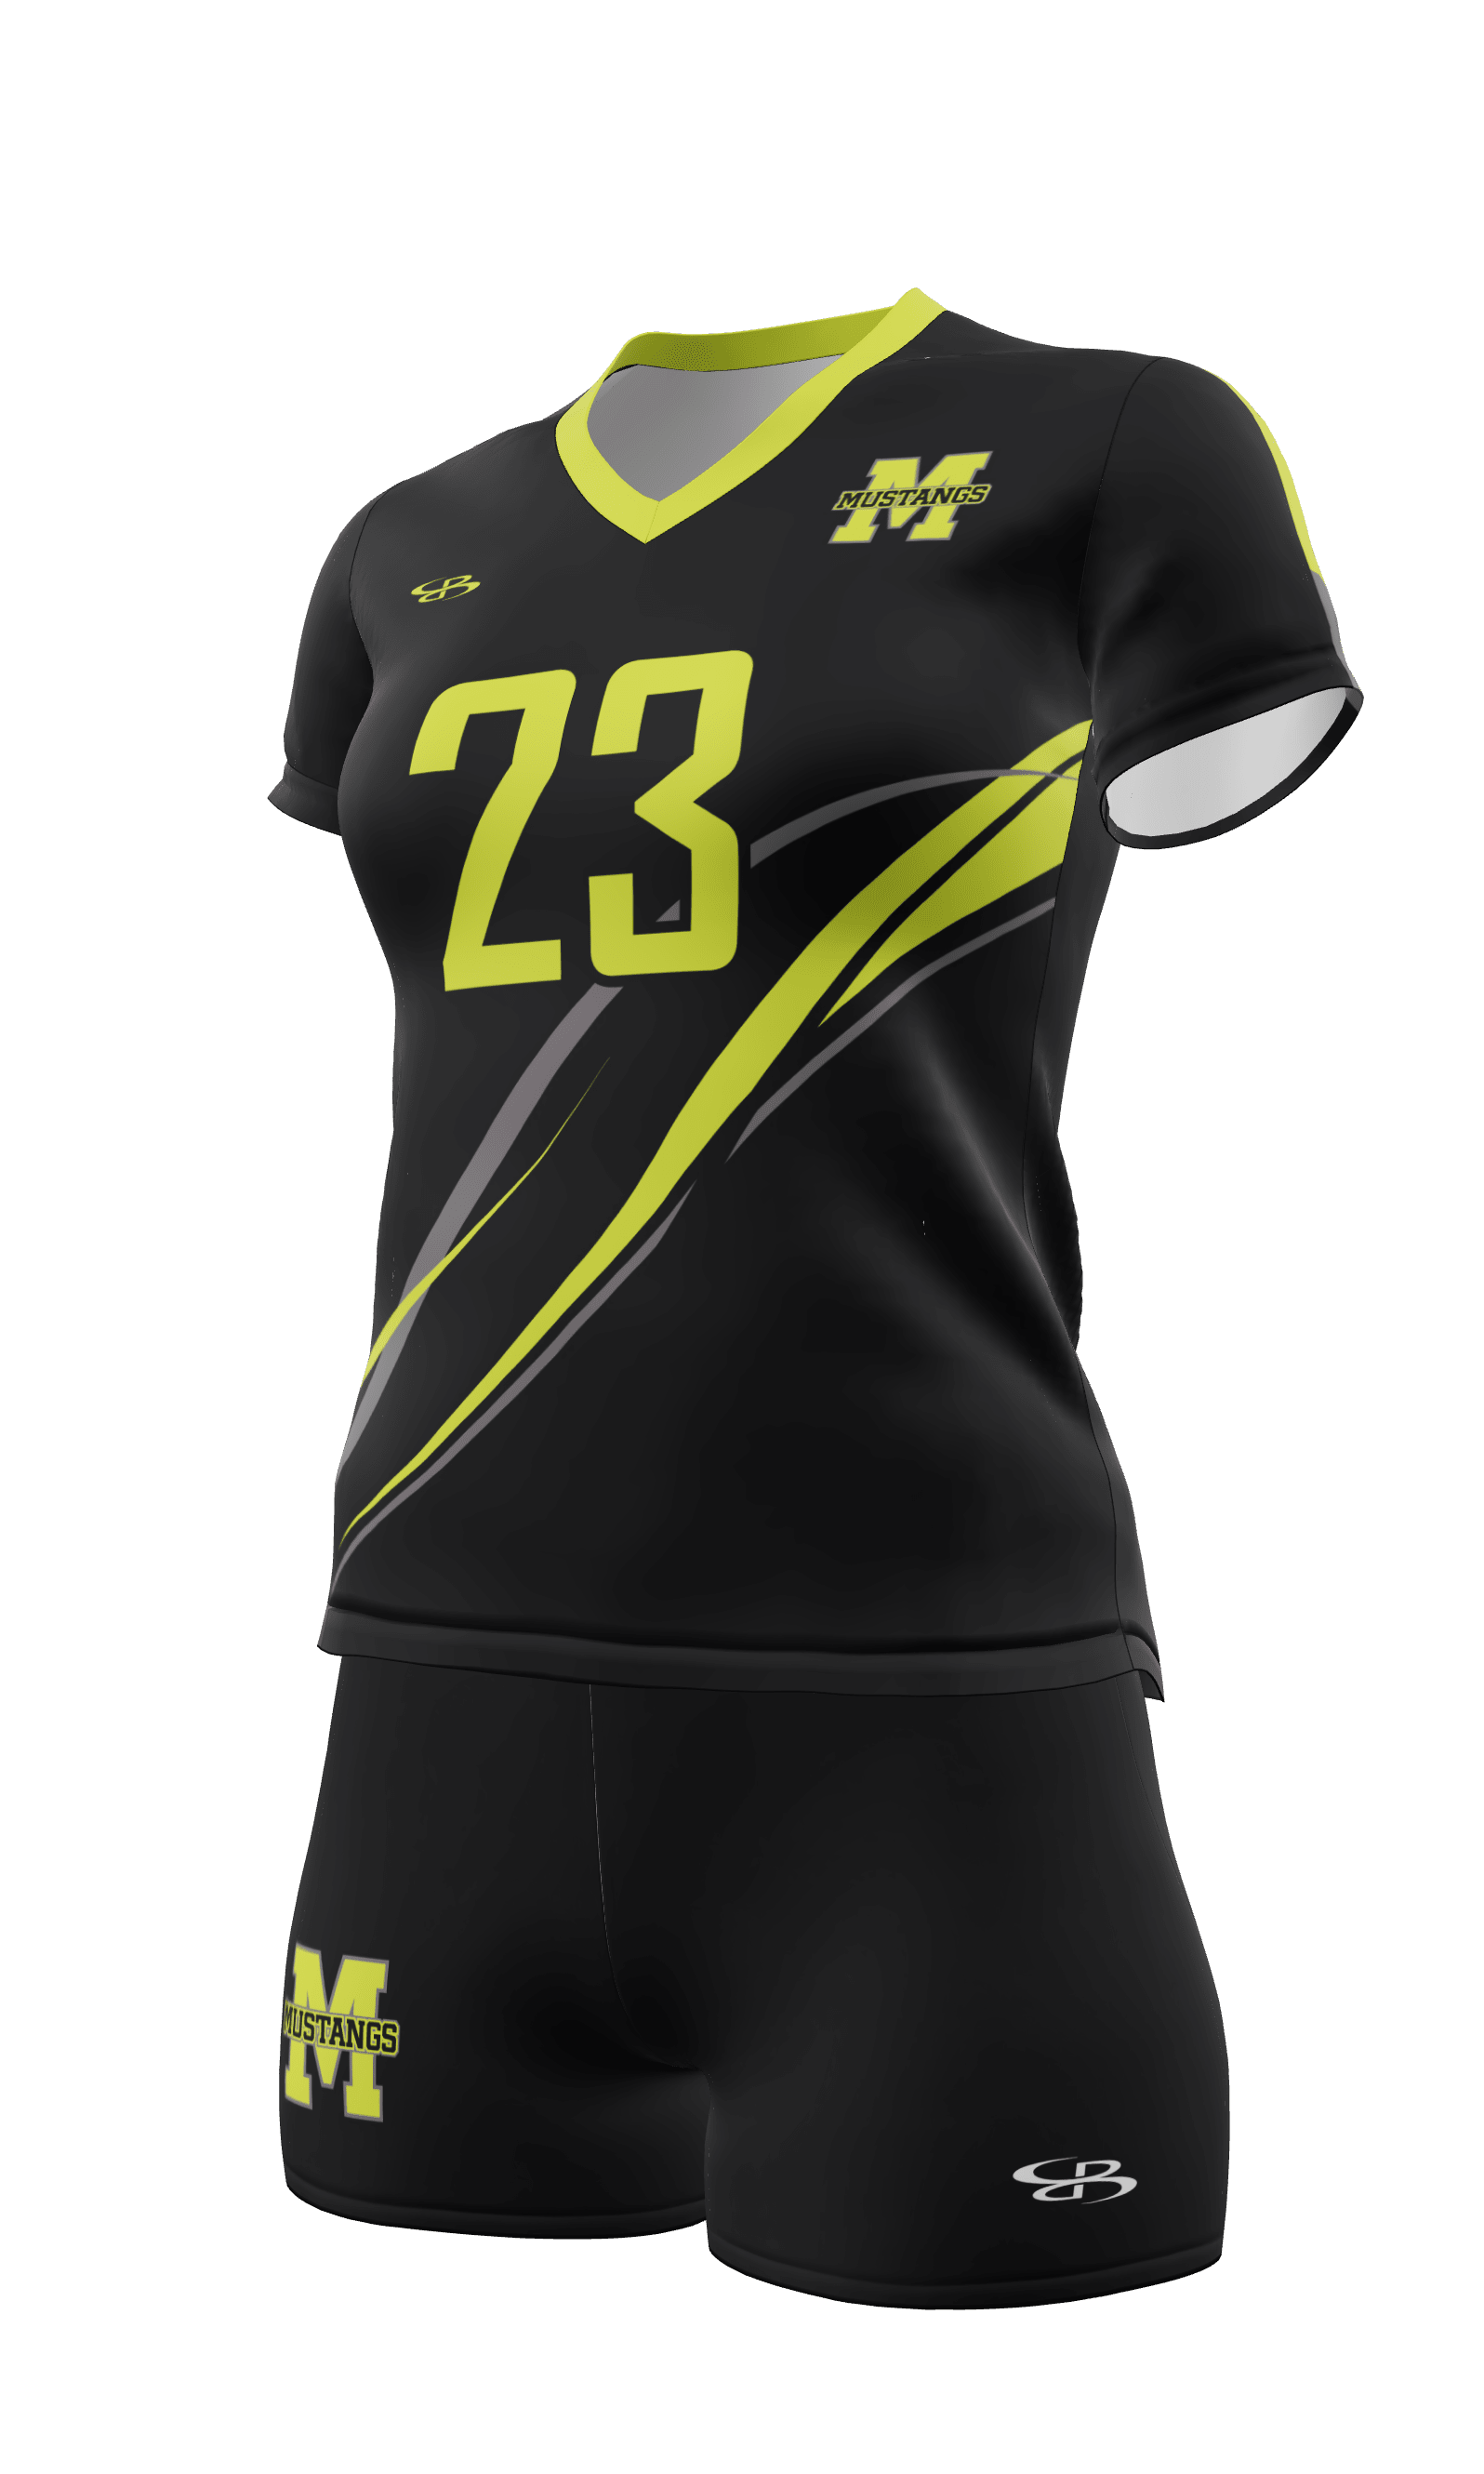 jersey for girls